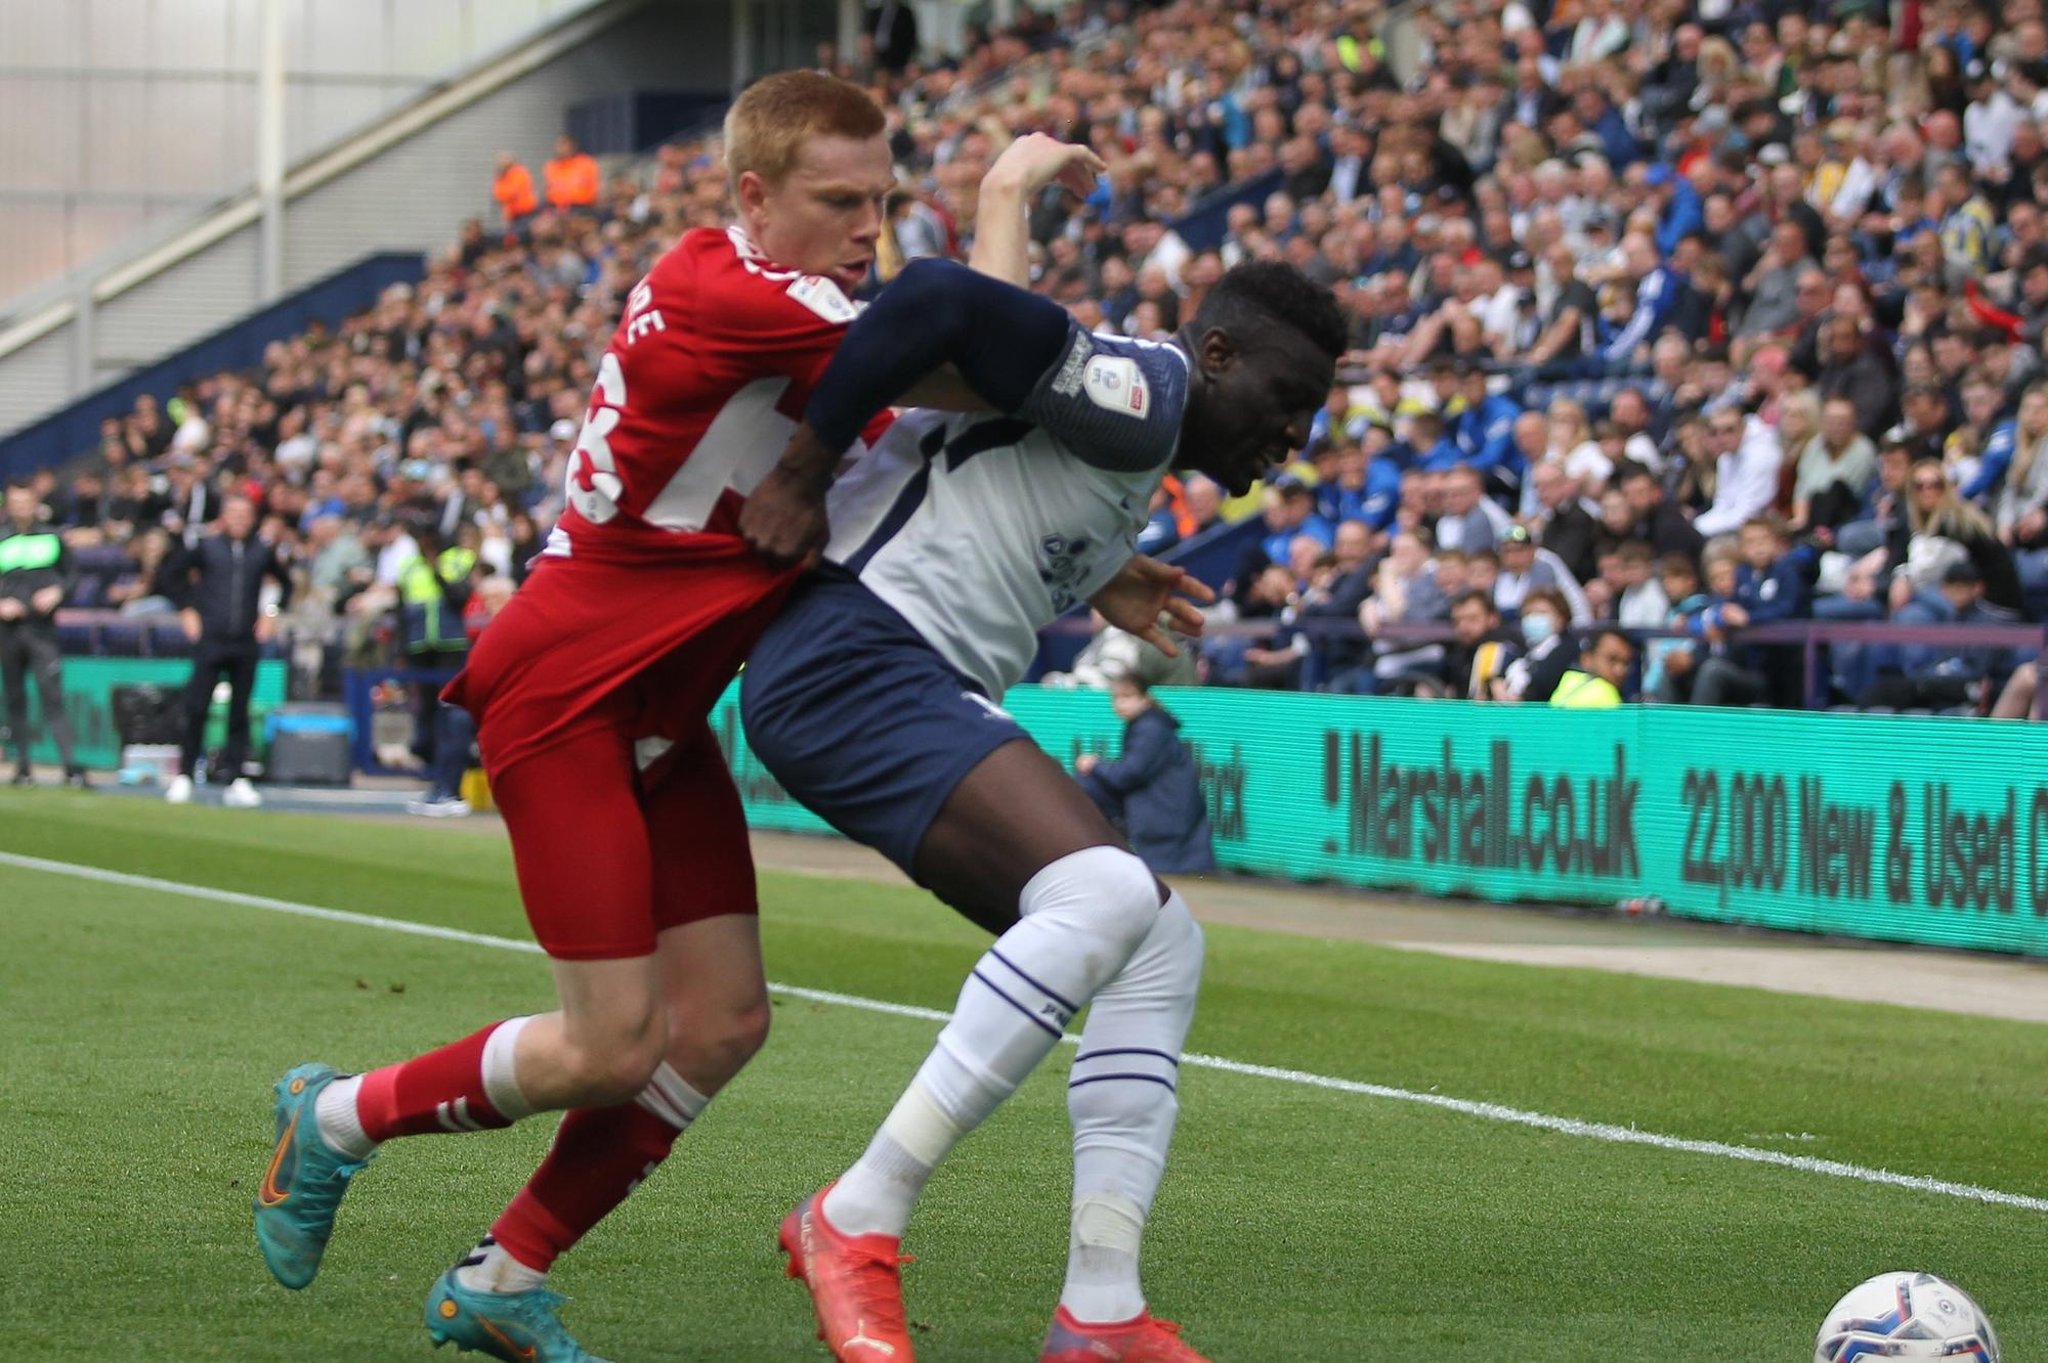 Preston North End ready to talk contract terms with defender as the summer rebuild at Deepdale starts